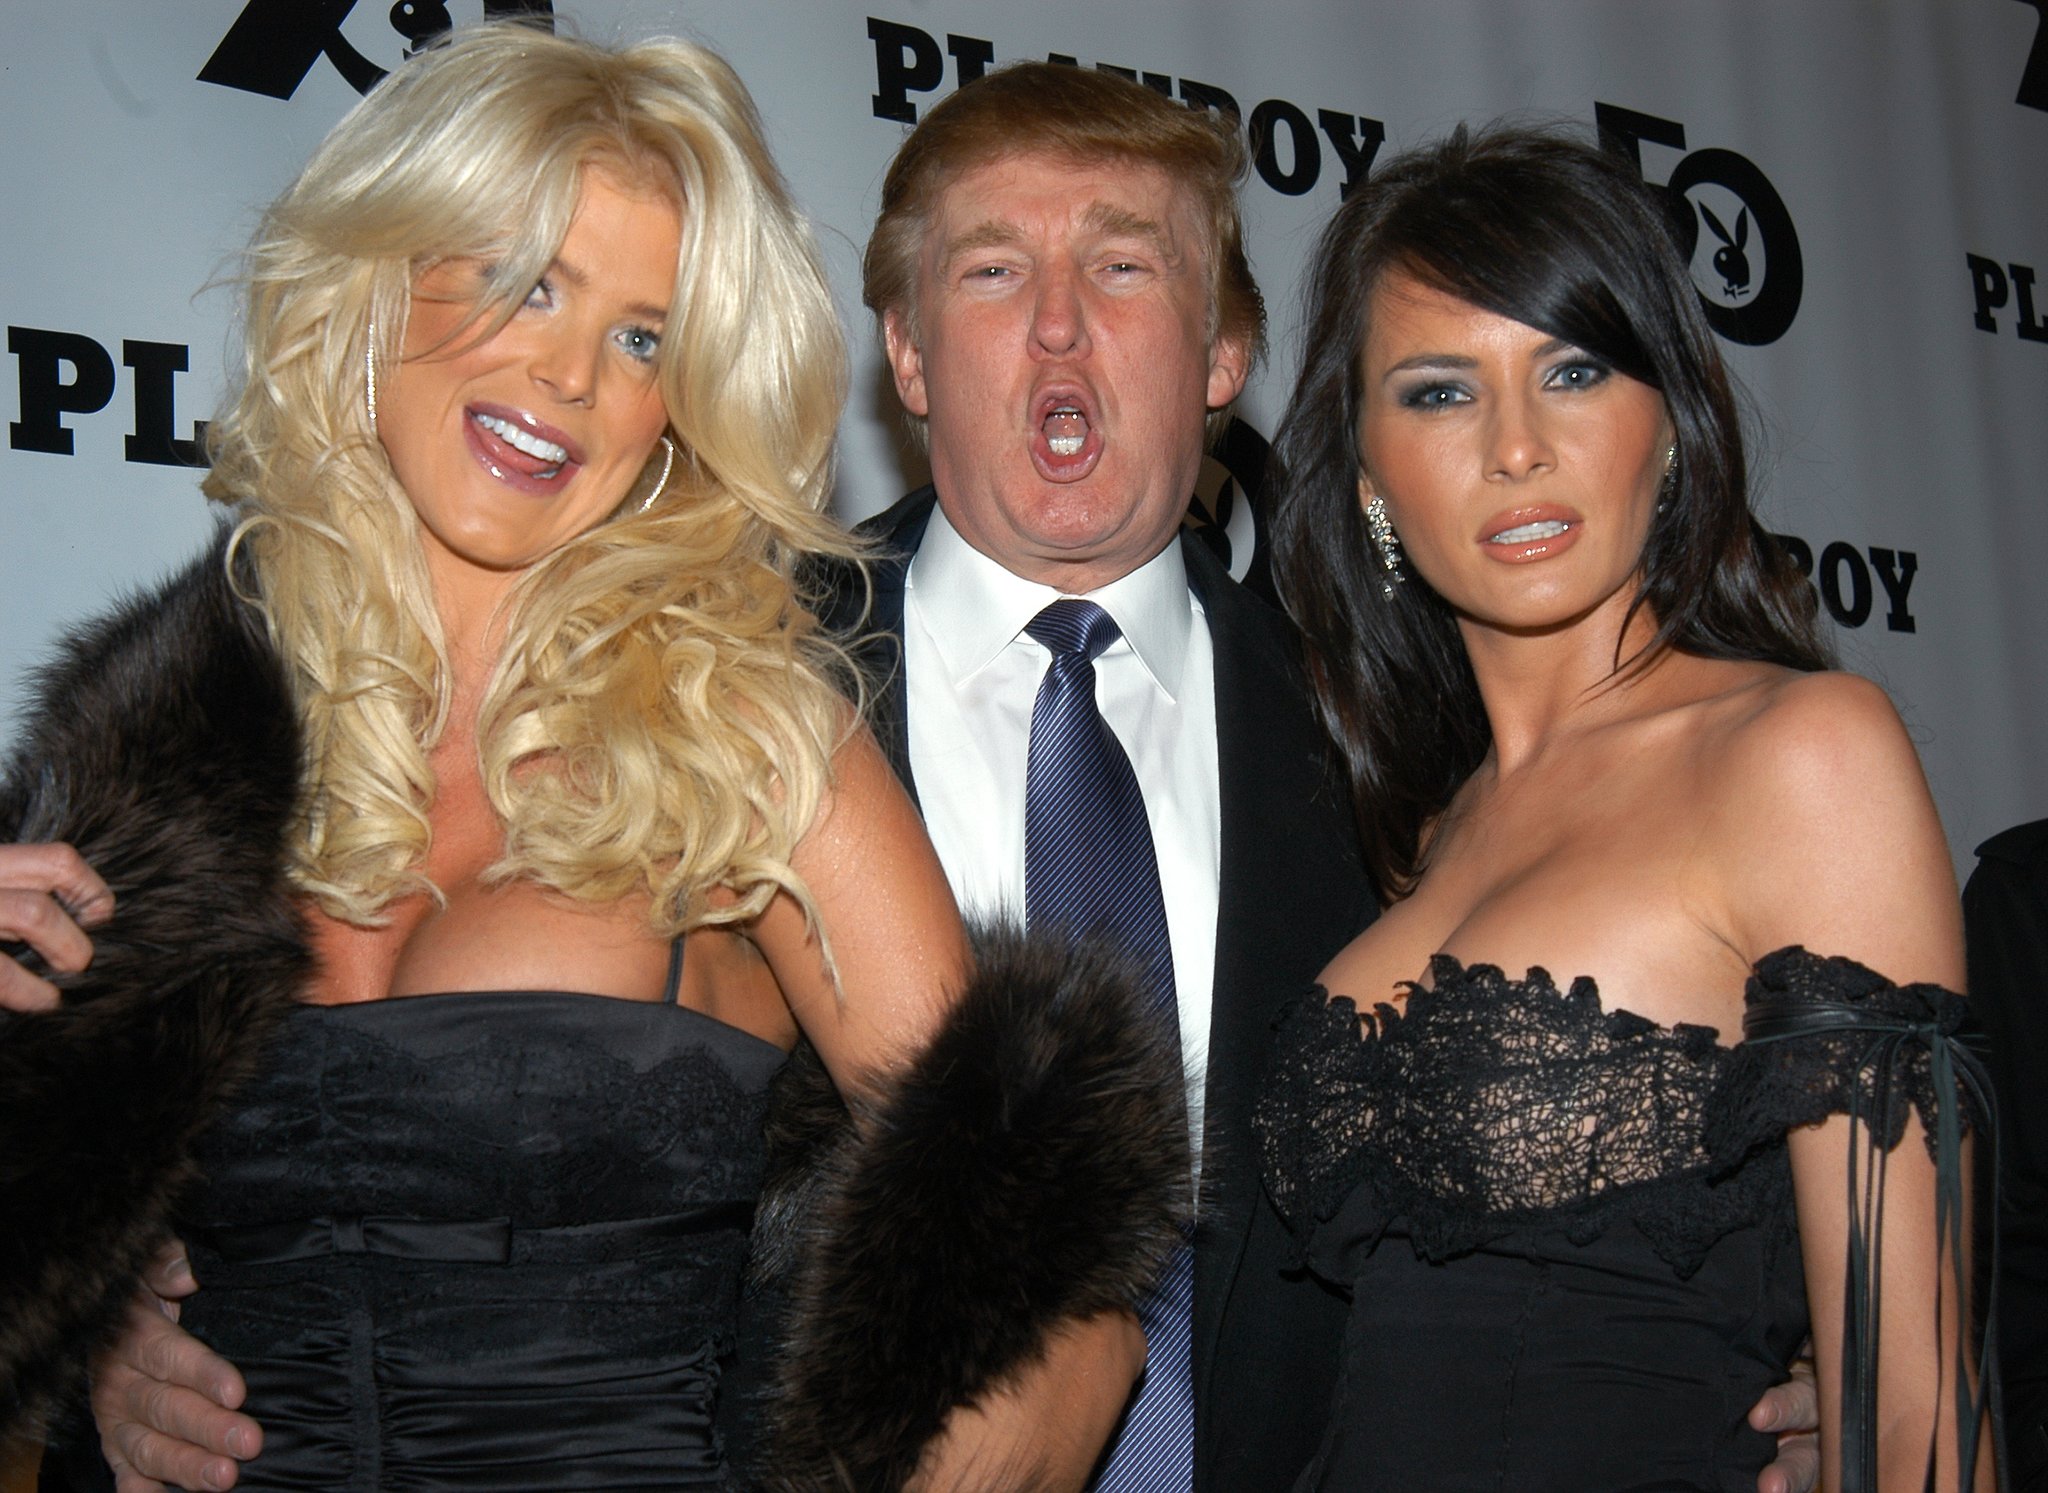 aashi gupta recommends trump playboy photos pic